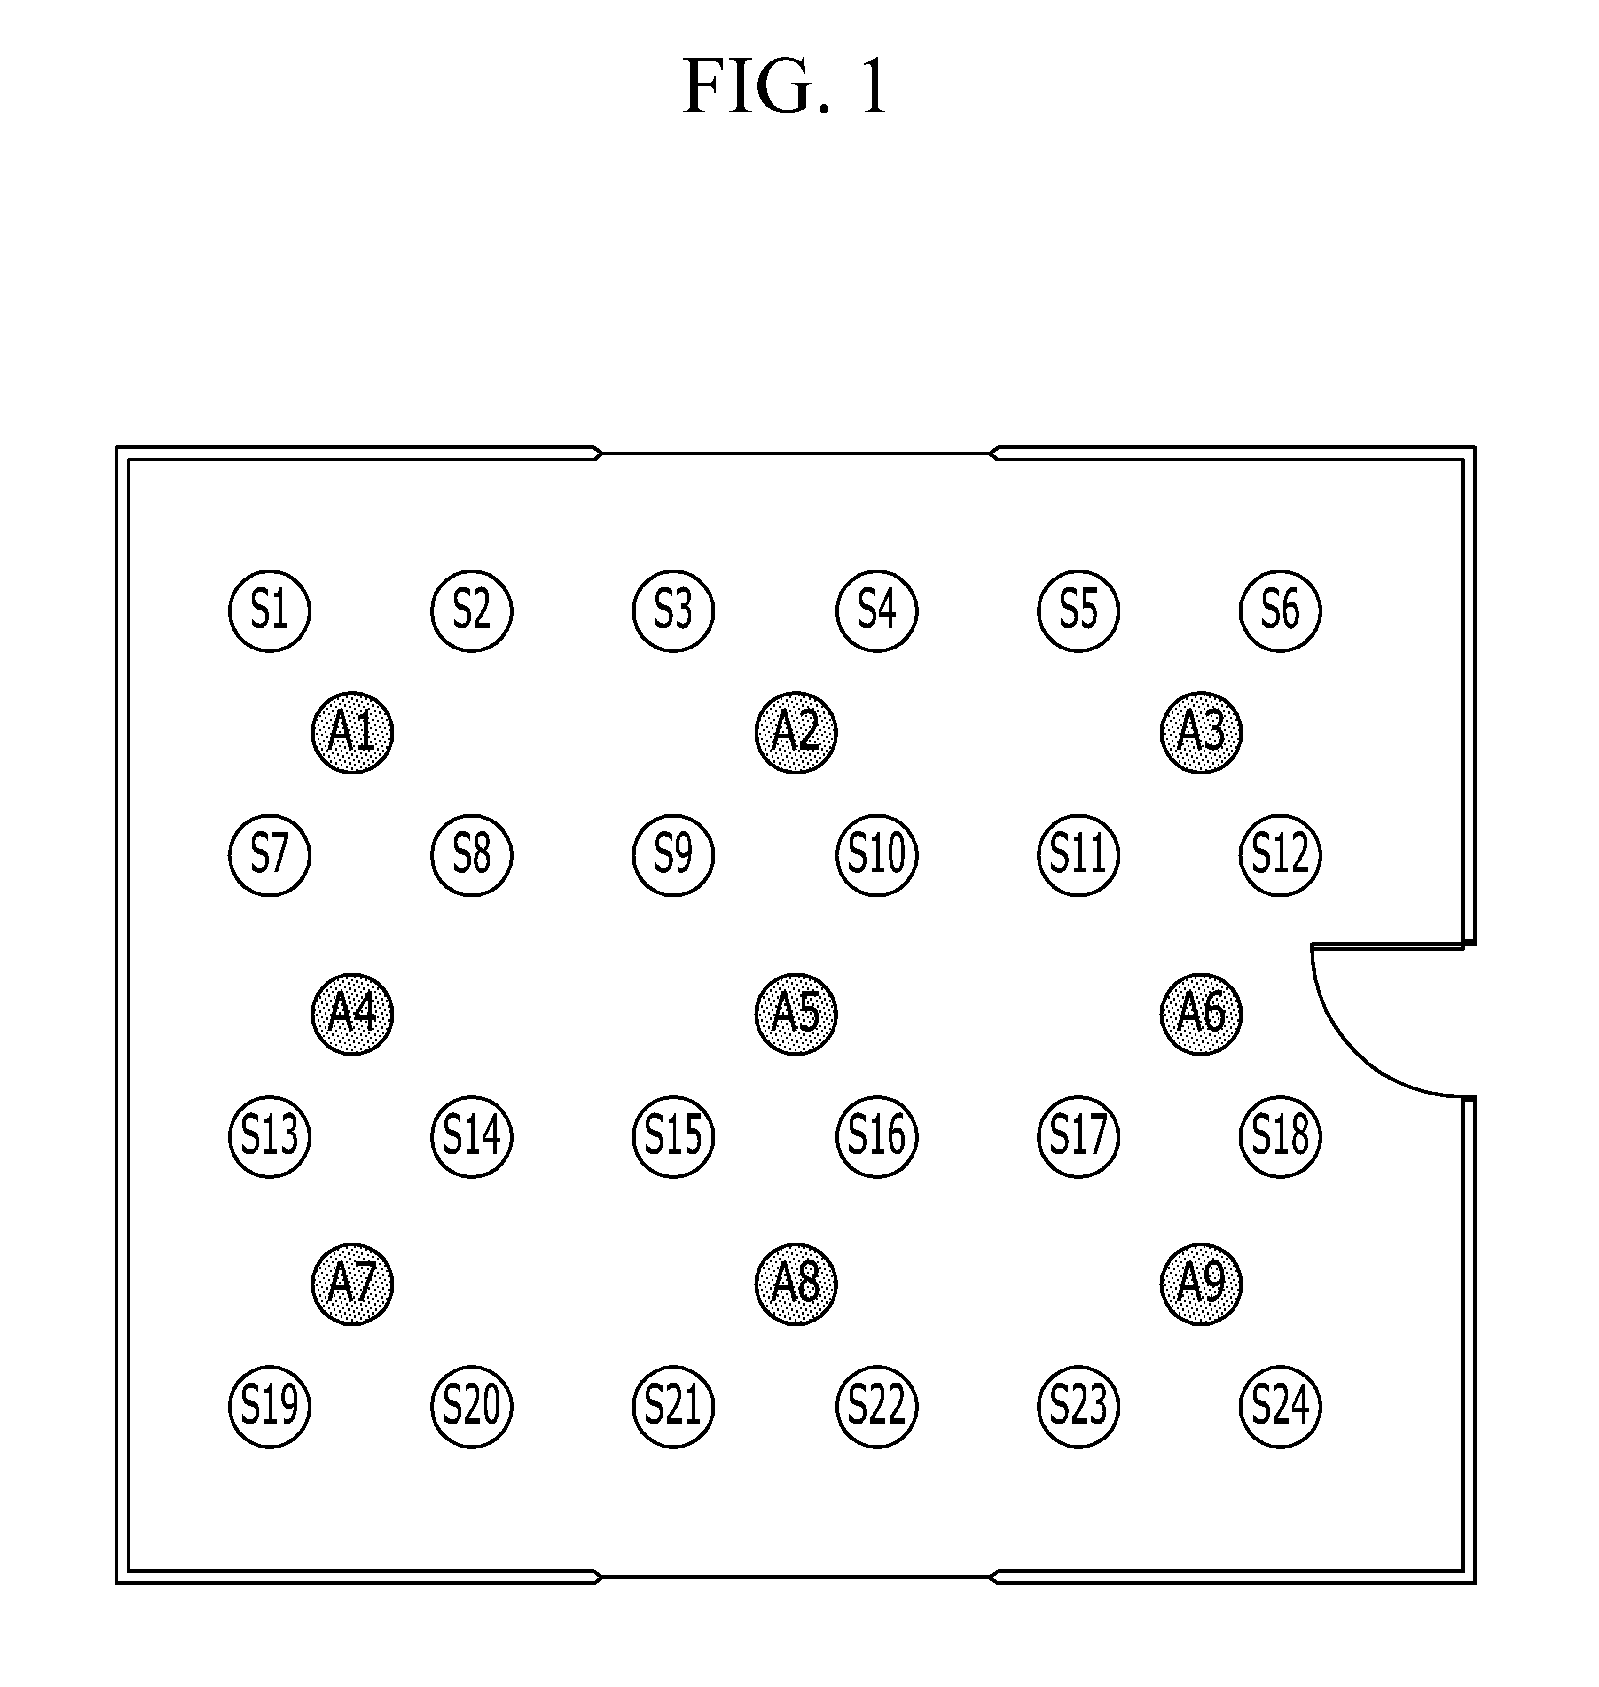 Actuator based on sensor actuator network and method of actuating the same